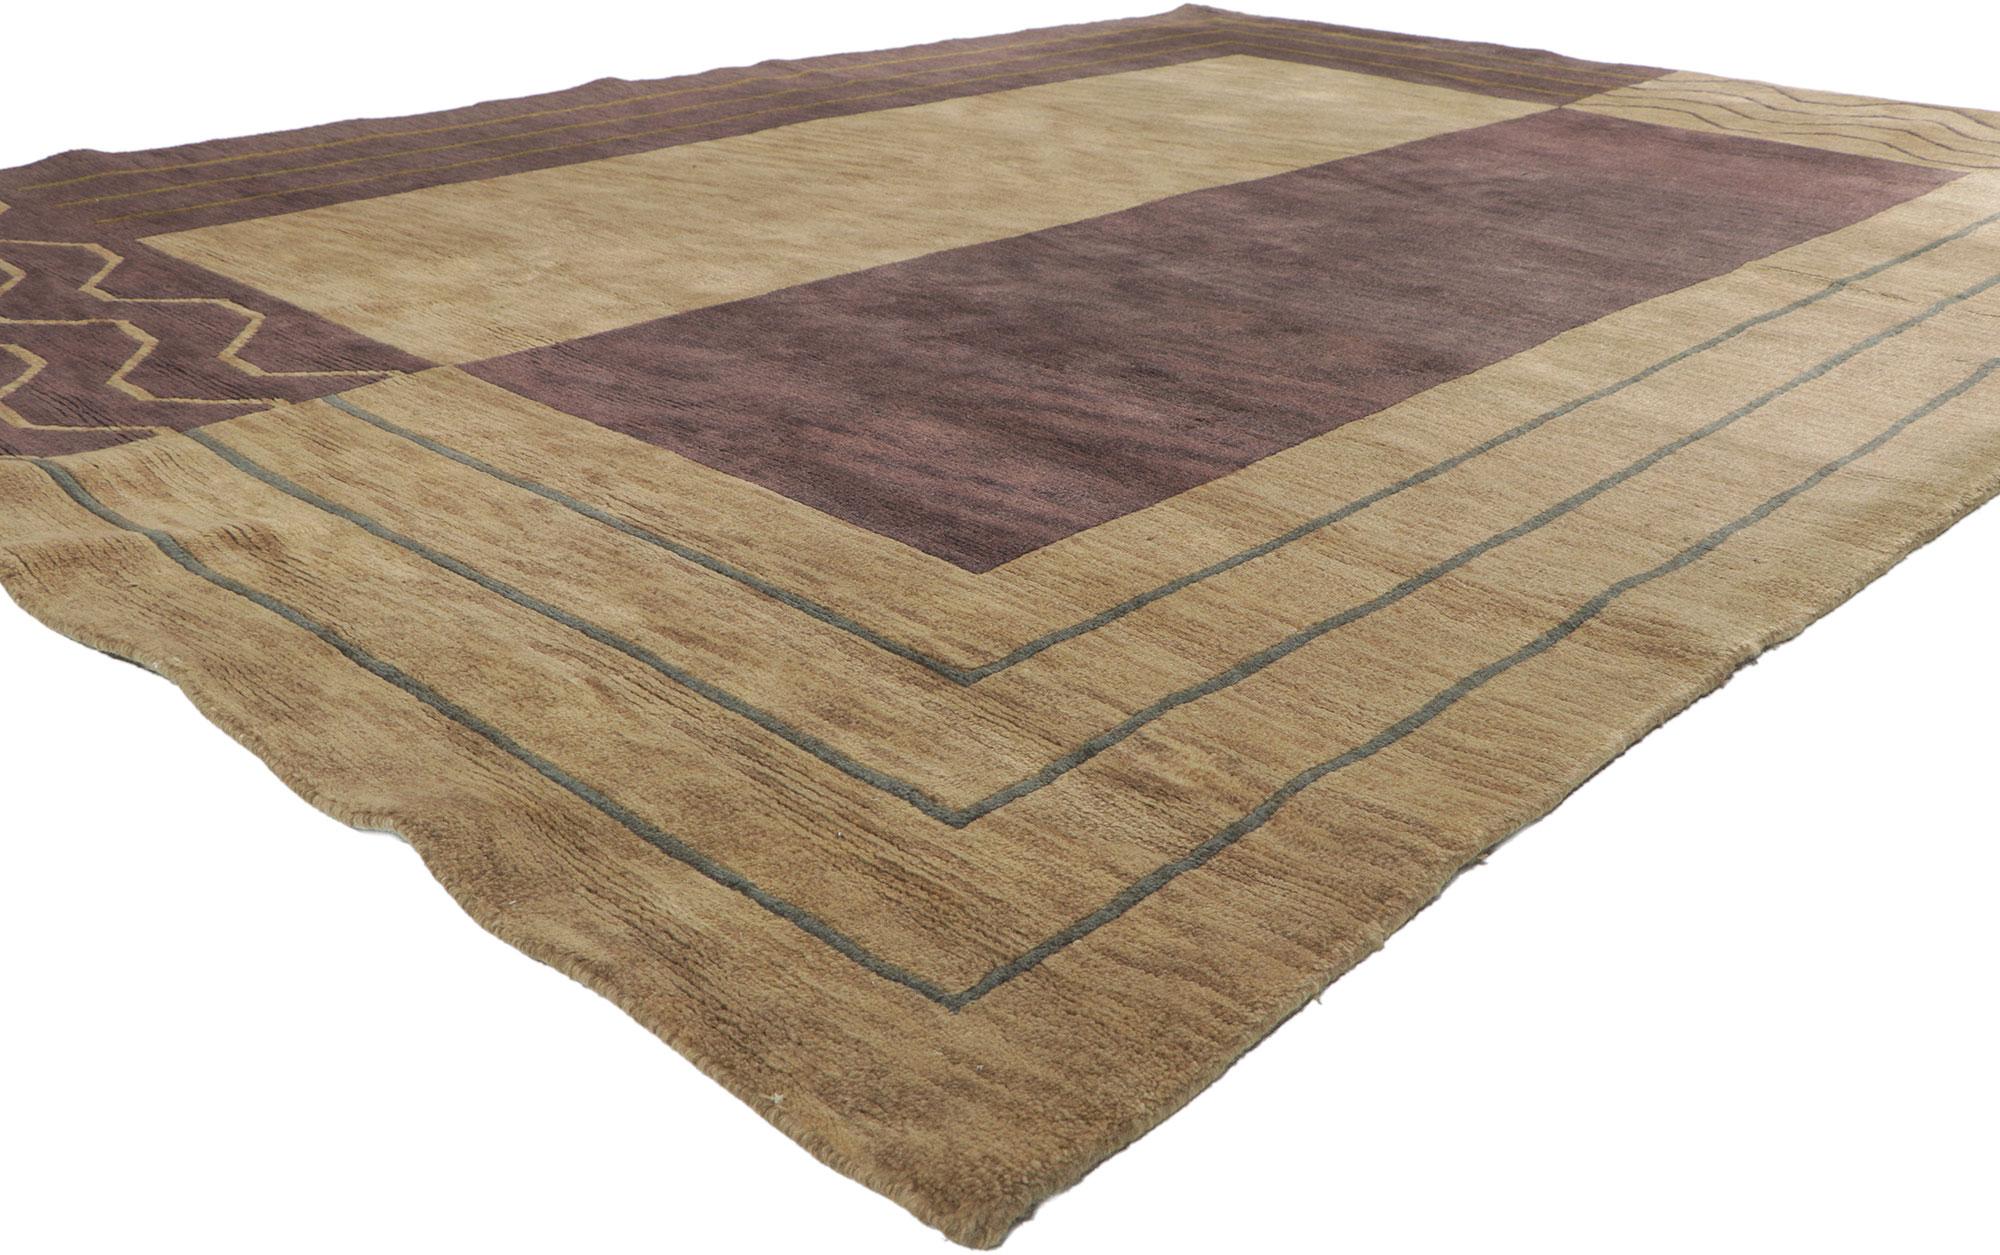 ?78353 Vintage Tibetan rug 08'00 x 11'00. With its incredible detail and texture, this hand knotted wool vintage Tibetan rug is a captivating vision of woven beauty. The eye-catching geometric design and earthy colorway woven into this vintage